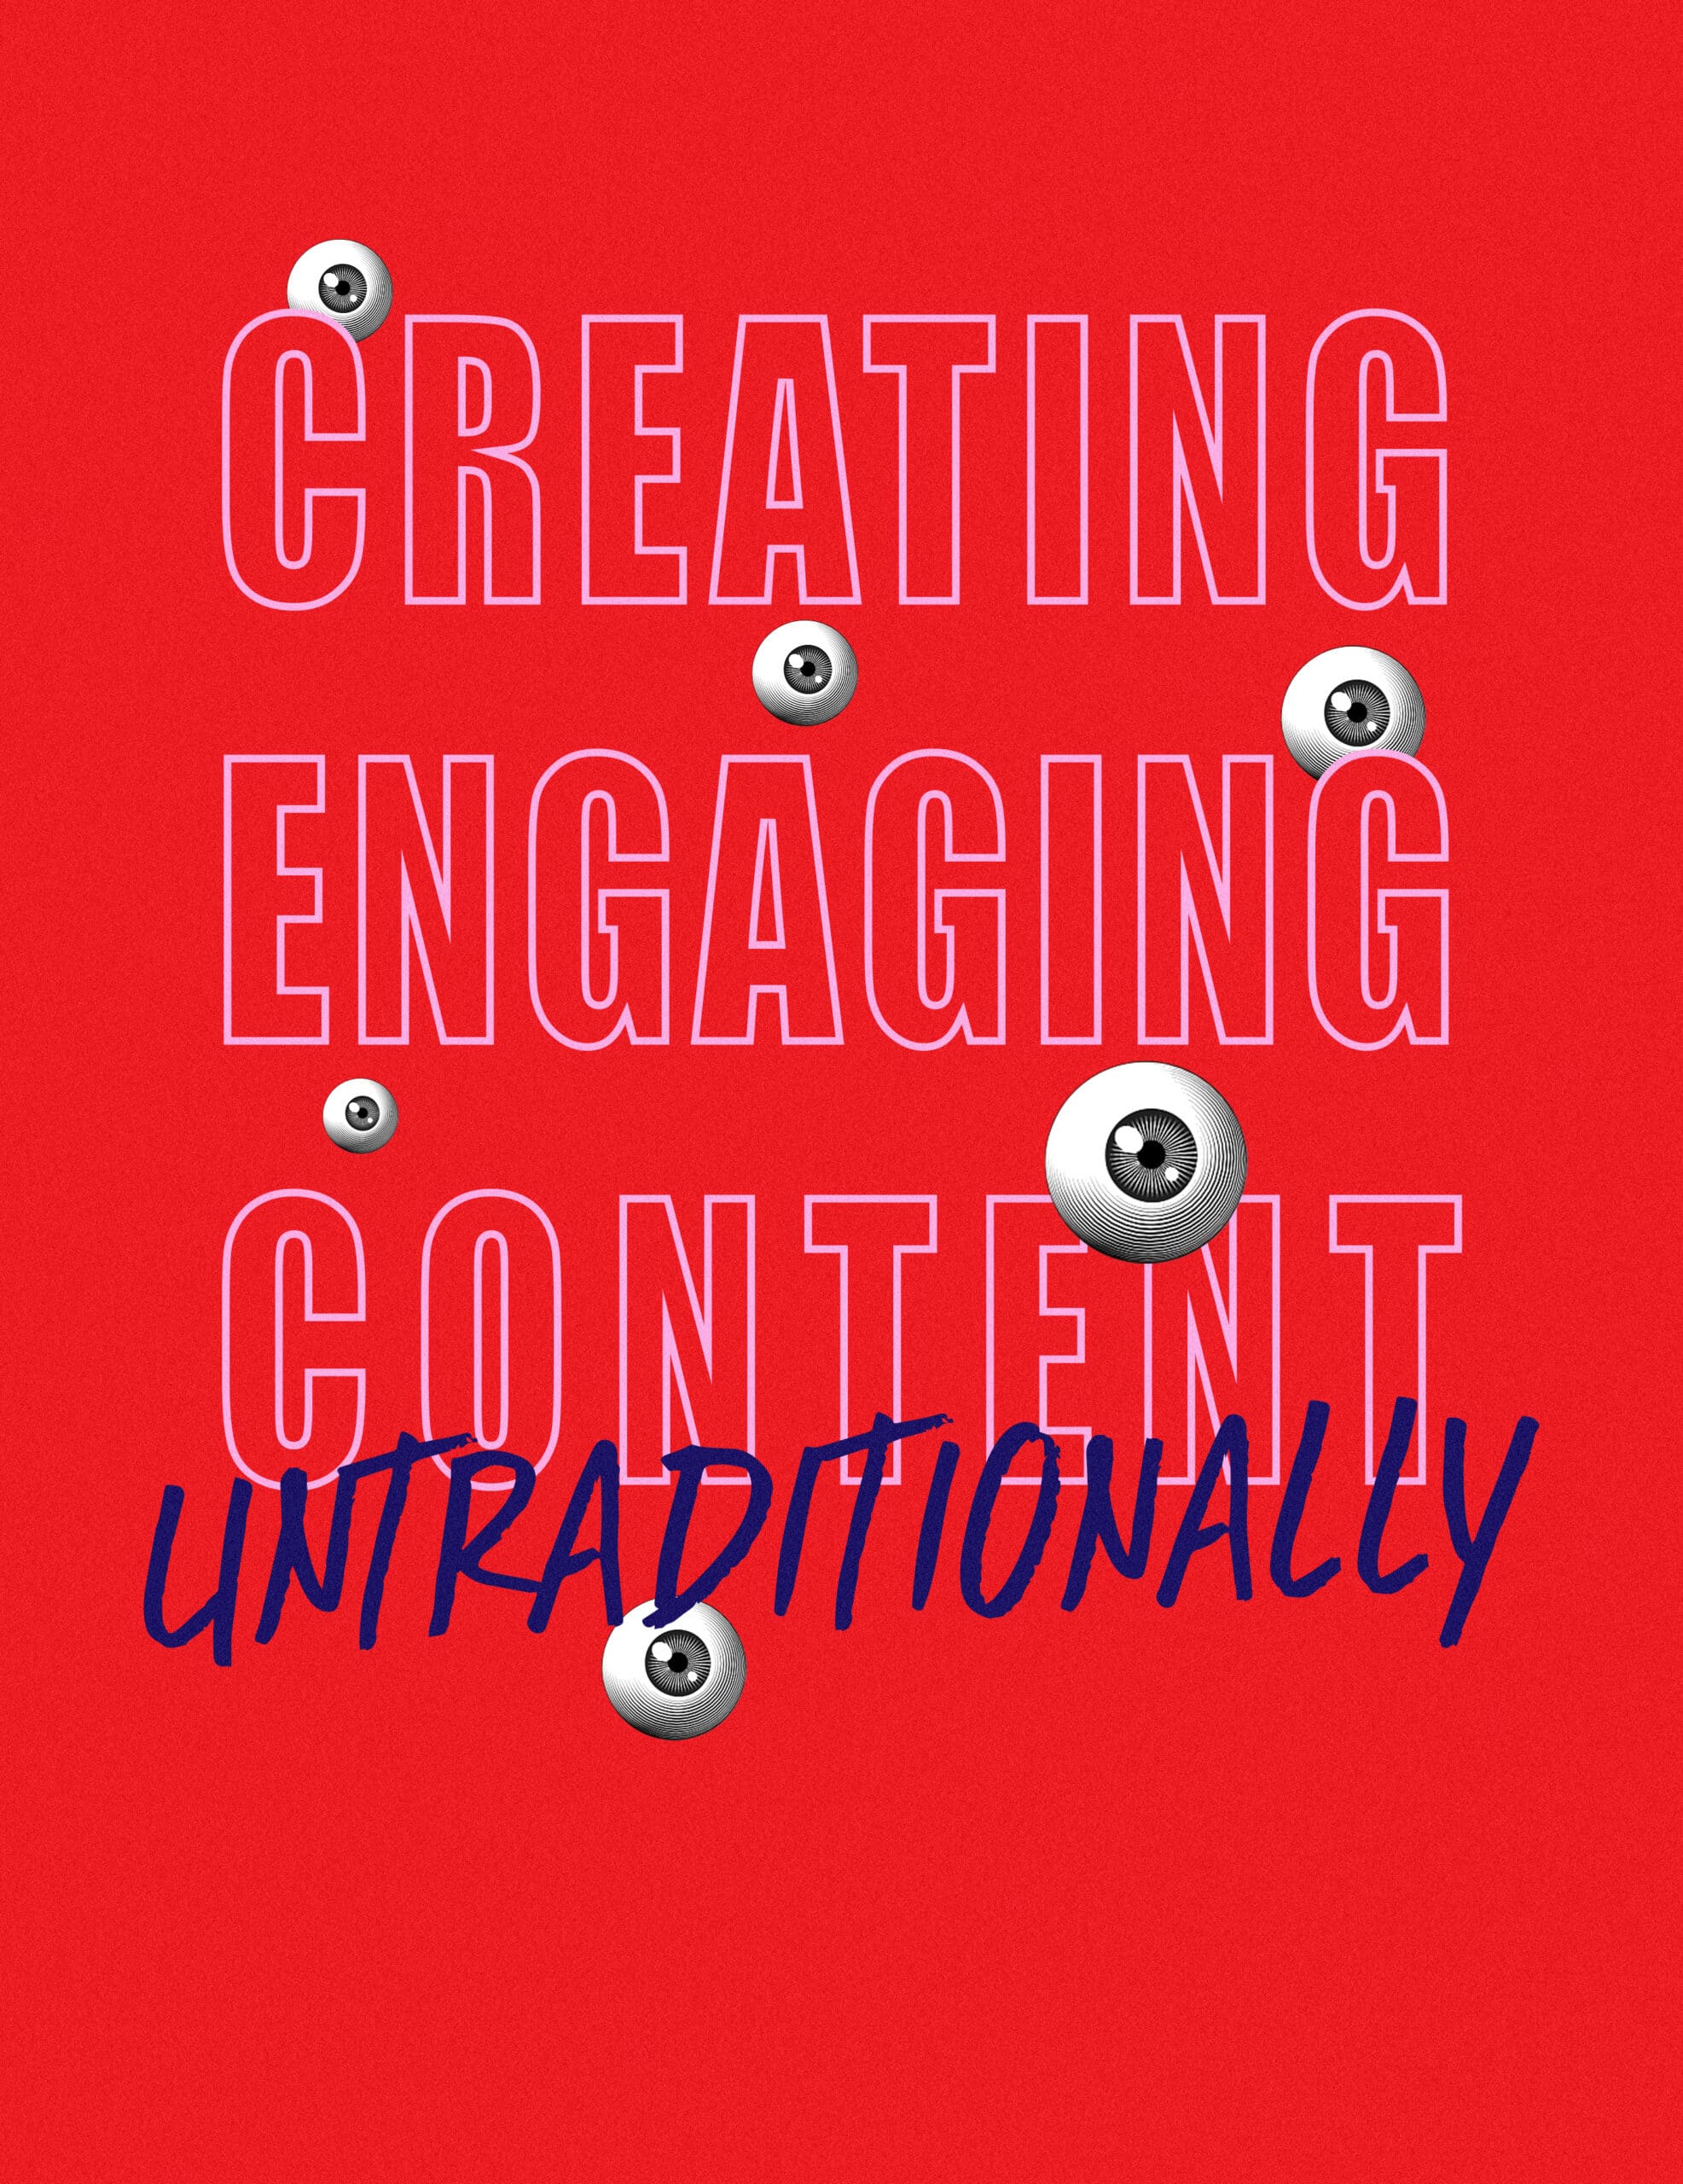 creating-engaging-content-untraditionally-header-image